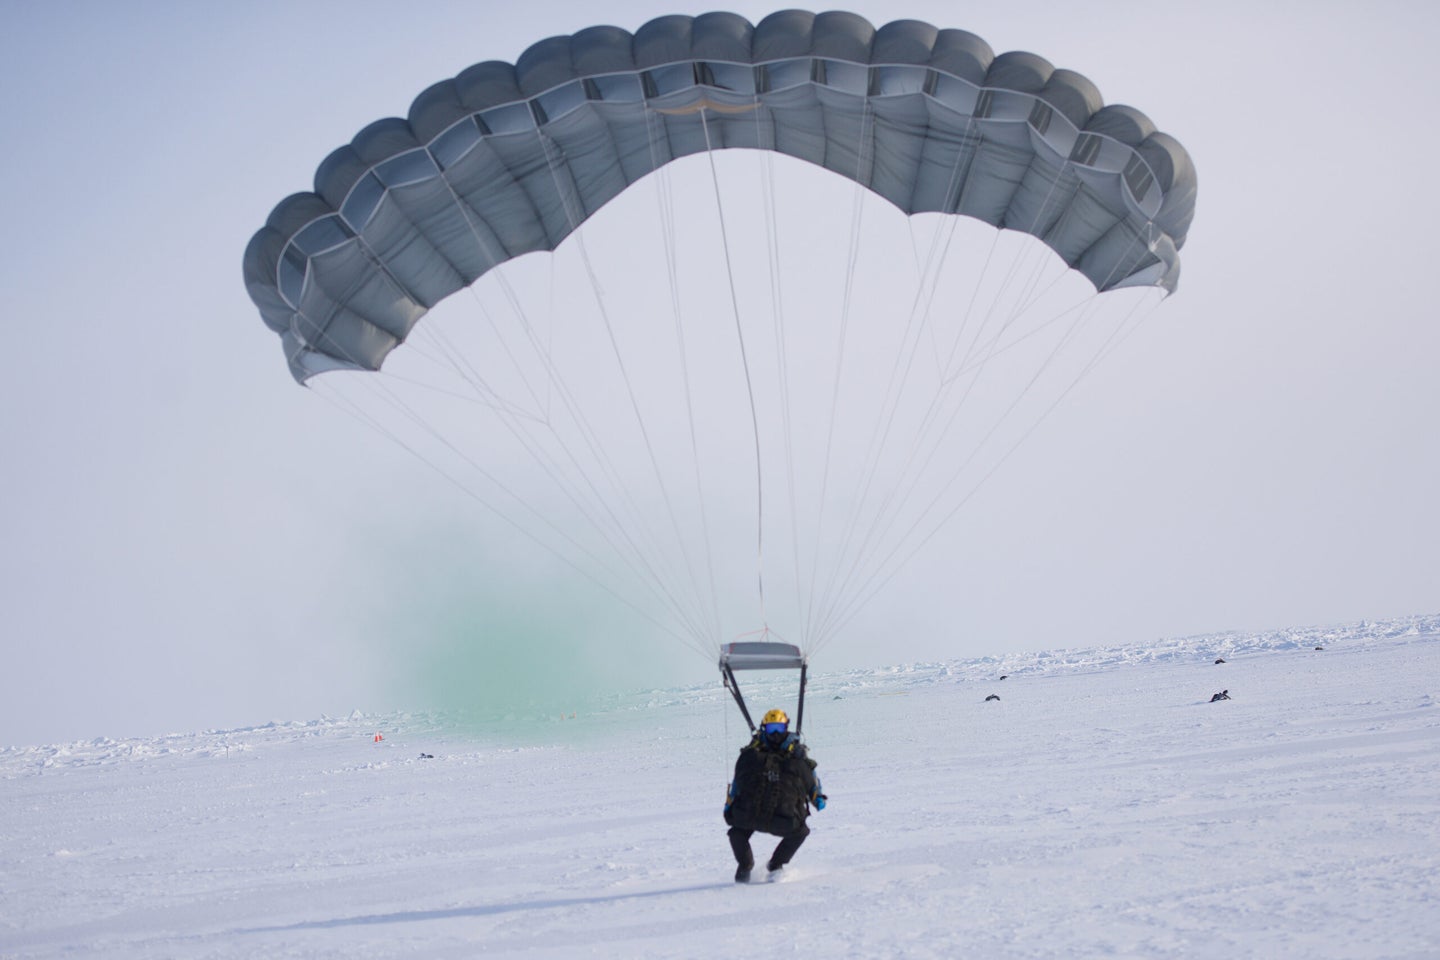 A 212th Rescue Squadron combat rescue officer from the Alaska Air National Guard lands at the U.S. Navy’s Ice Camp Queenfish on the arctic ice pack March 14, 2022. (Master Sgt. Benjamin Westveer, U.S. Air National Guard)